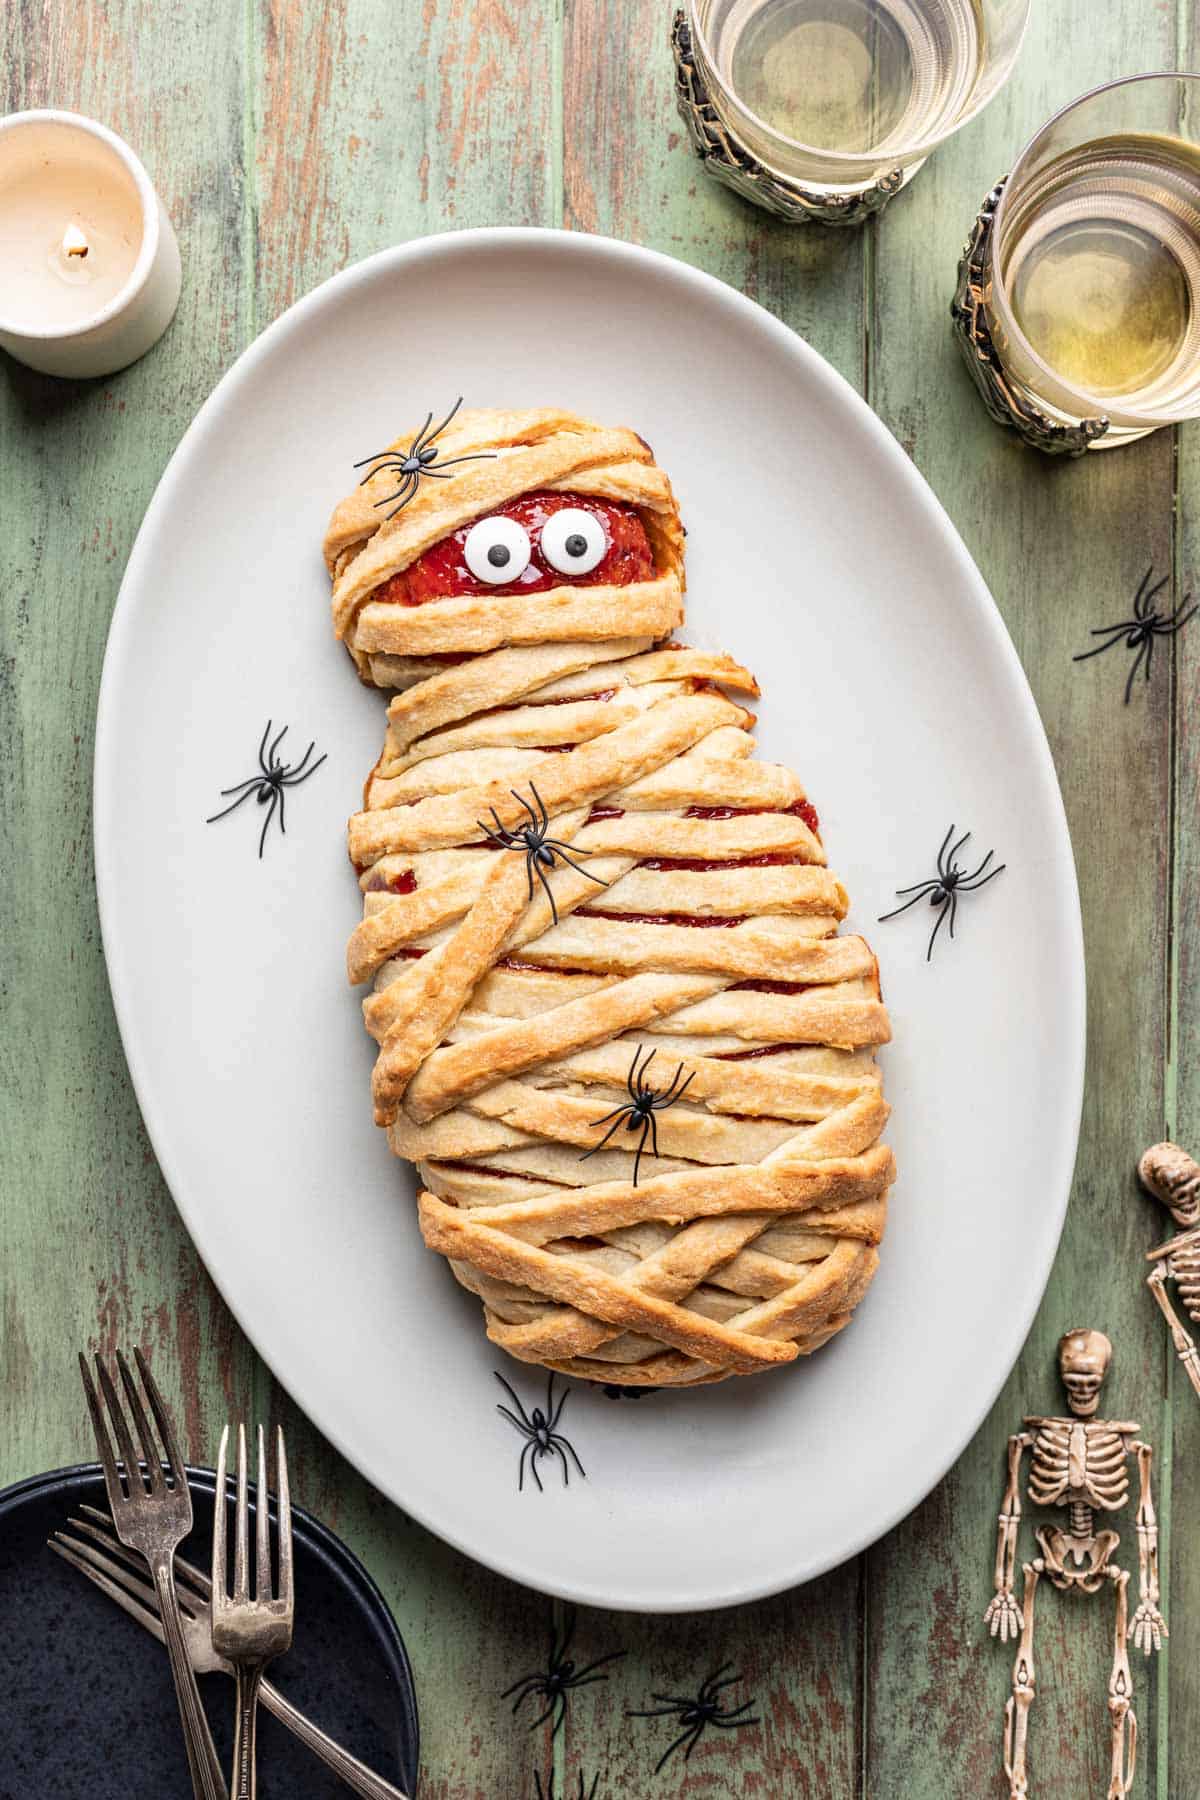 Mummy meatloaf with candy eyes on a serving platter.